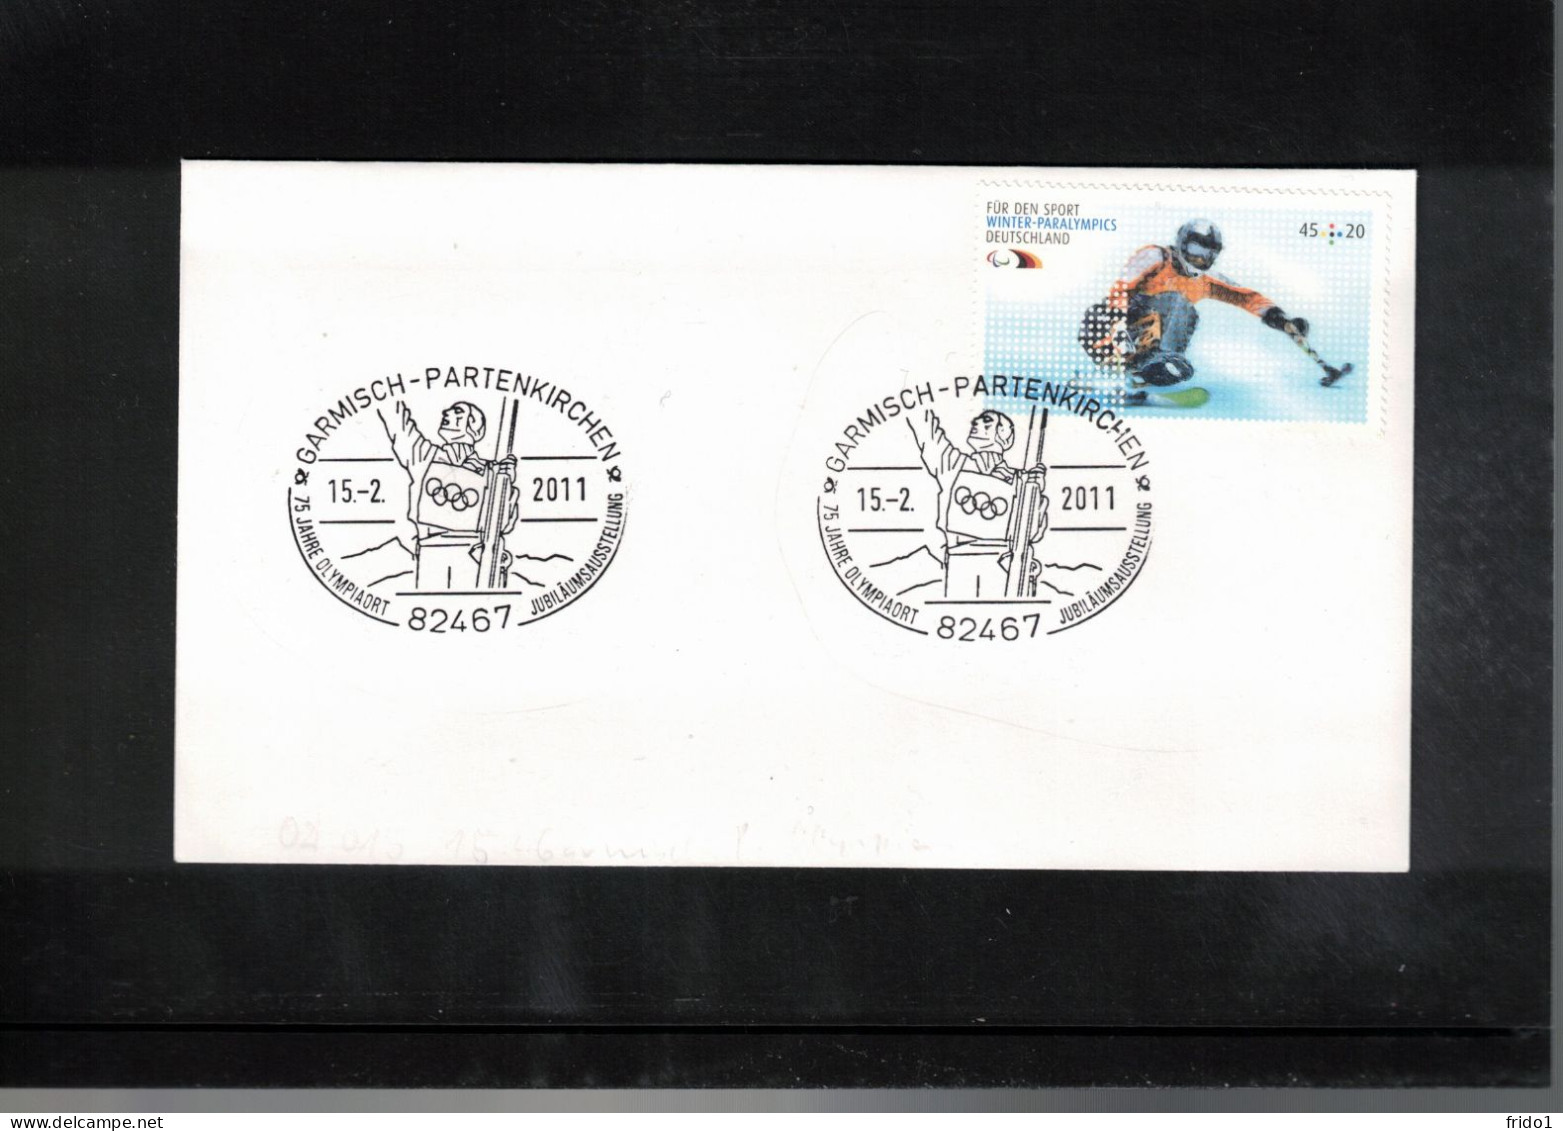 Germany 2011 75th Anniversary Of The Olympic Games In Garmisch-Partenkirchen Interesting Cover - Inverno1936: Garmisch-Partenkirchen